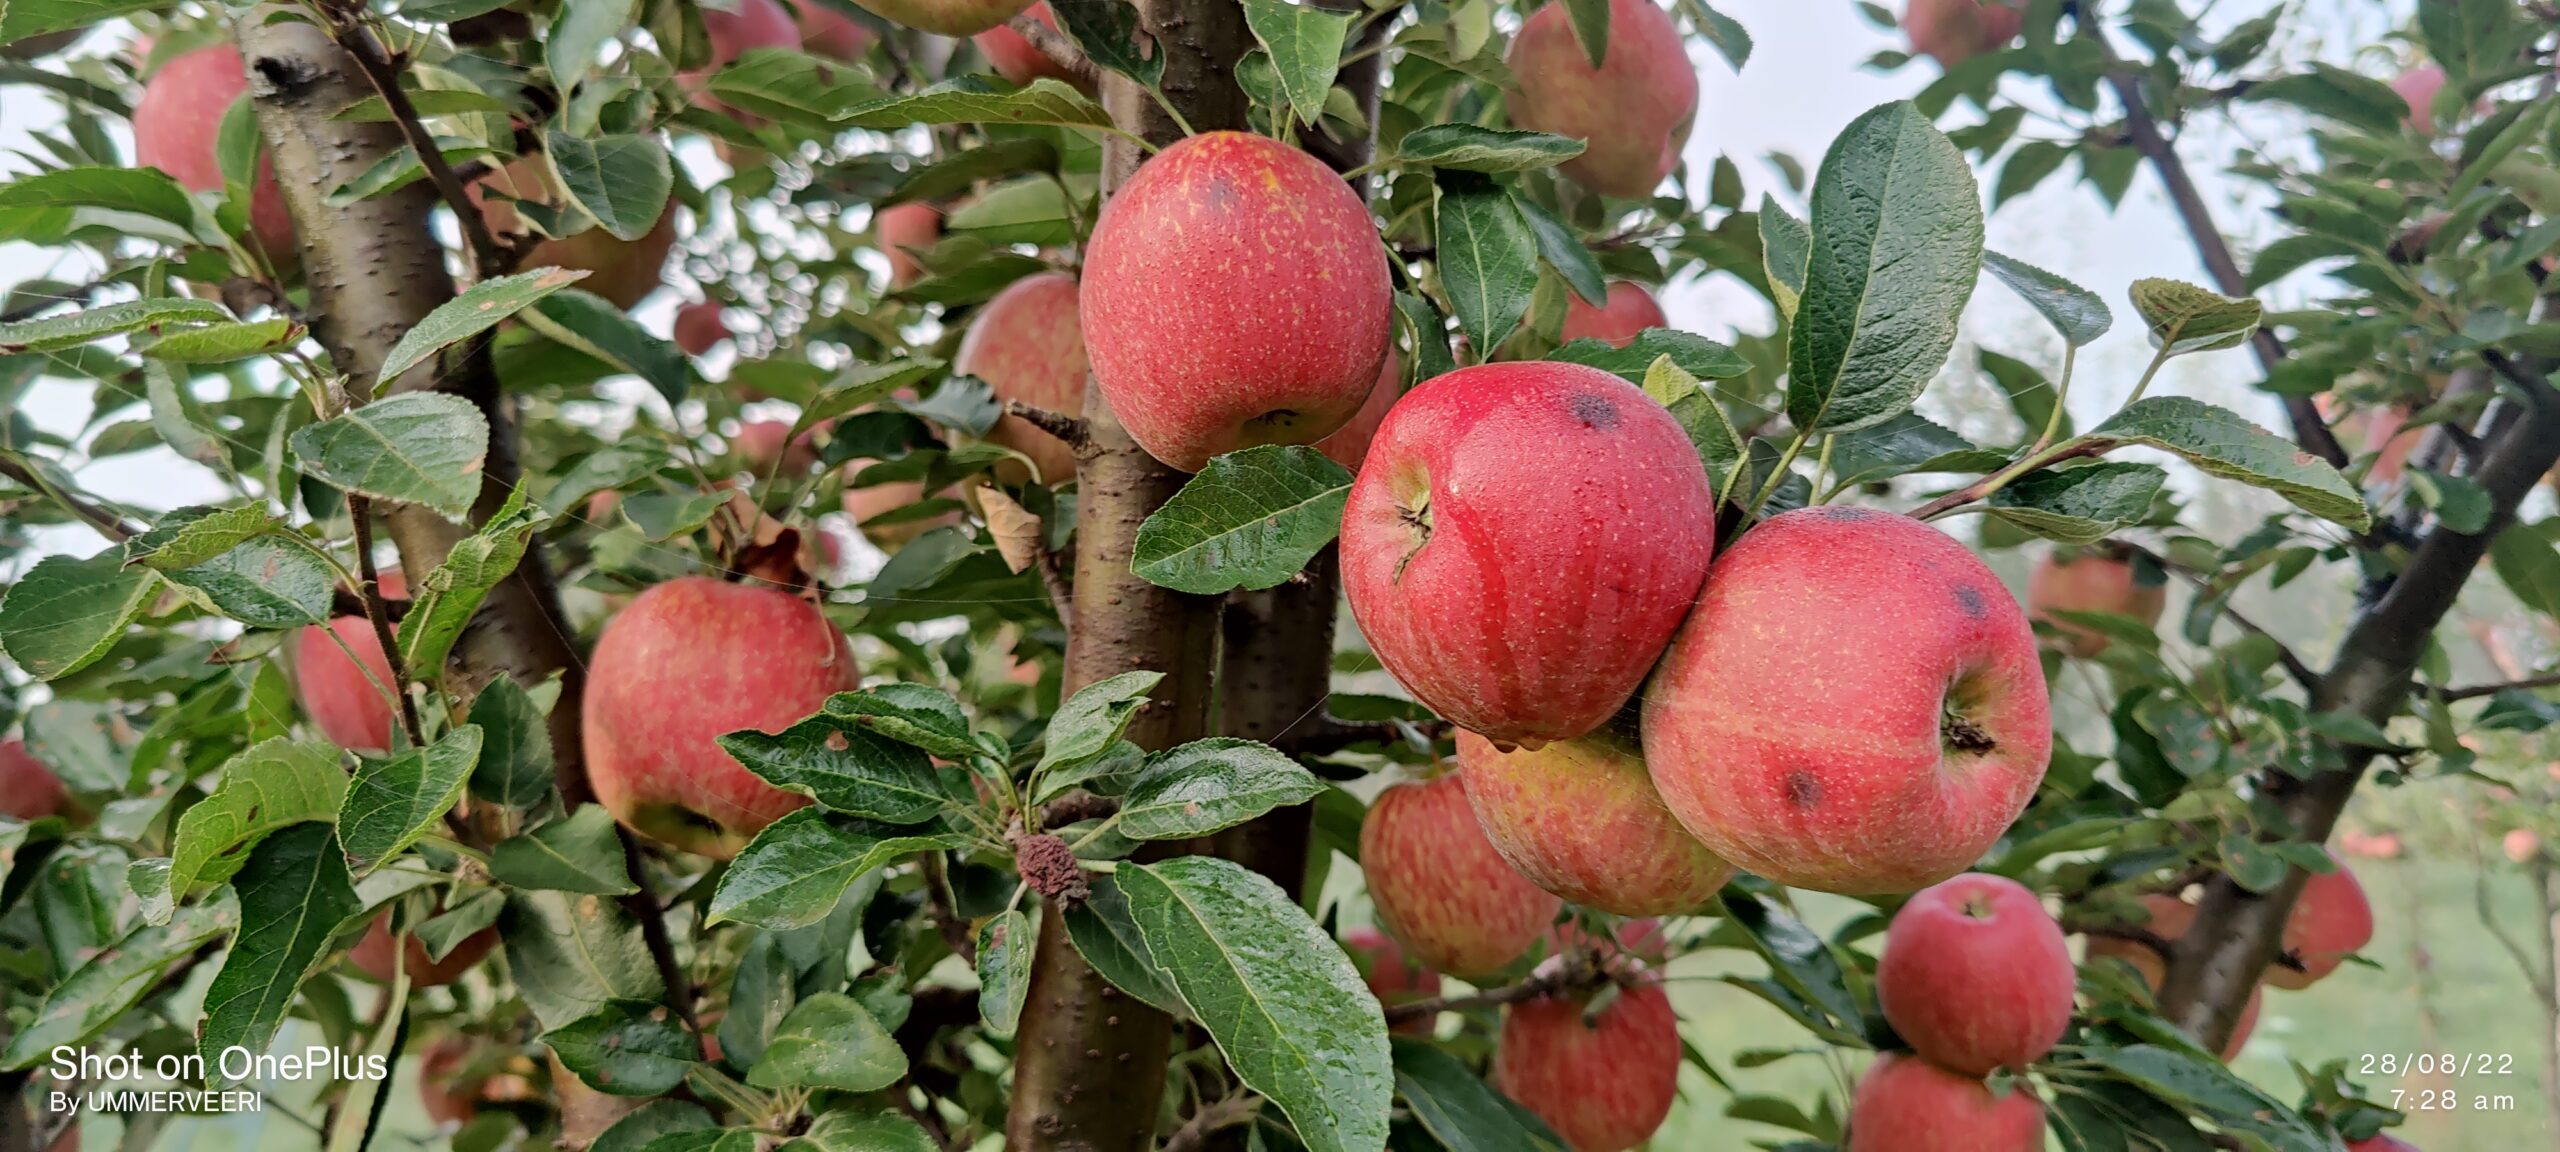 Read more about the article Bitter Pit in Apples: Causes, Symptoms, and Solutions